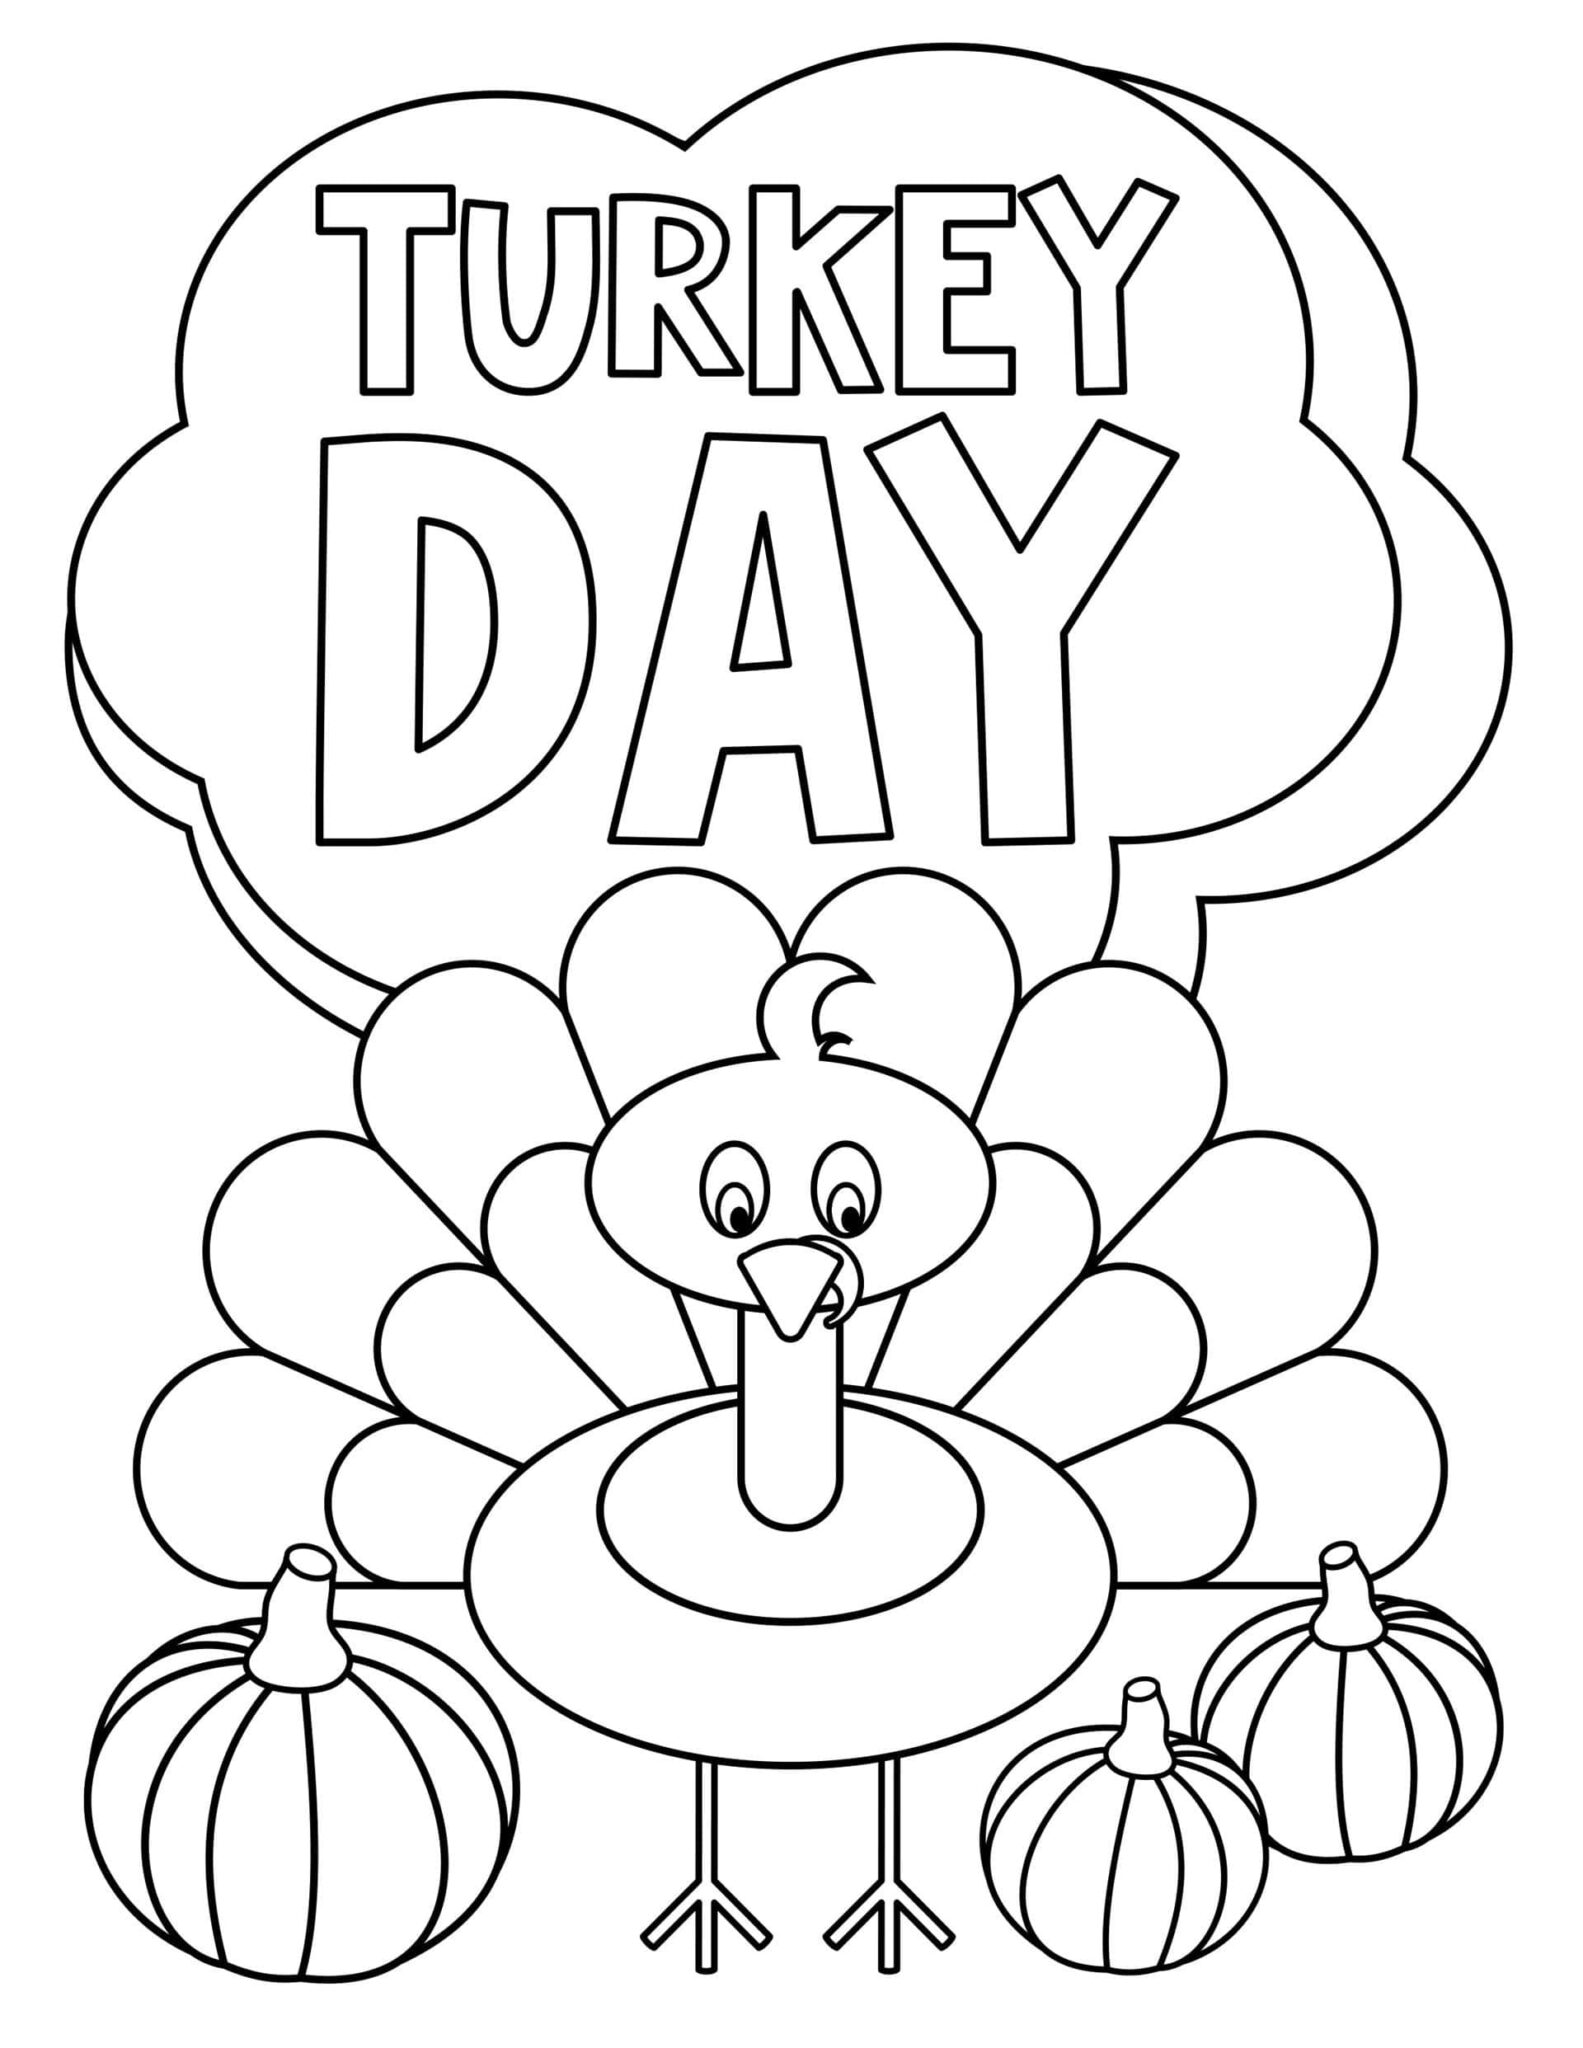 30+ FREE Thanksgiving Coloring Pages for Adults & Kids